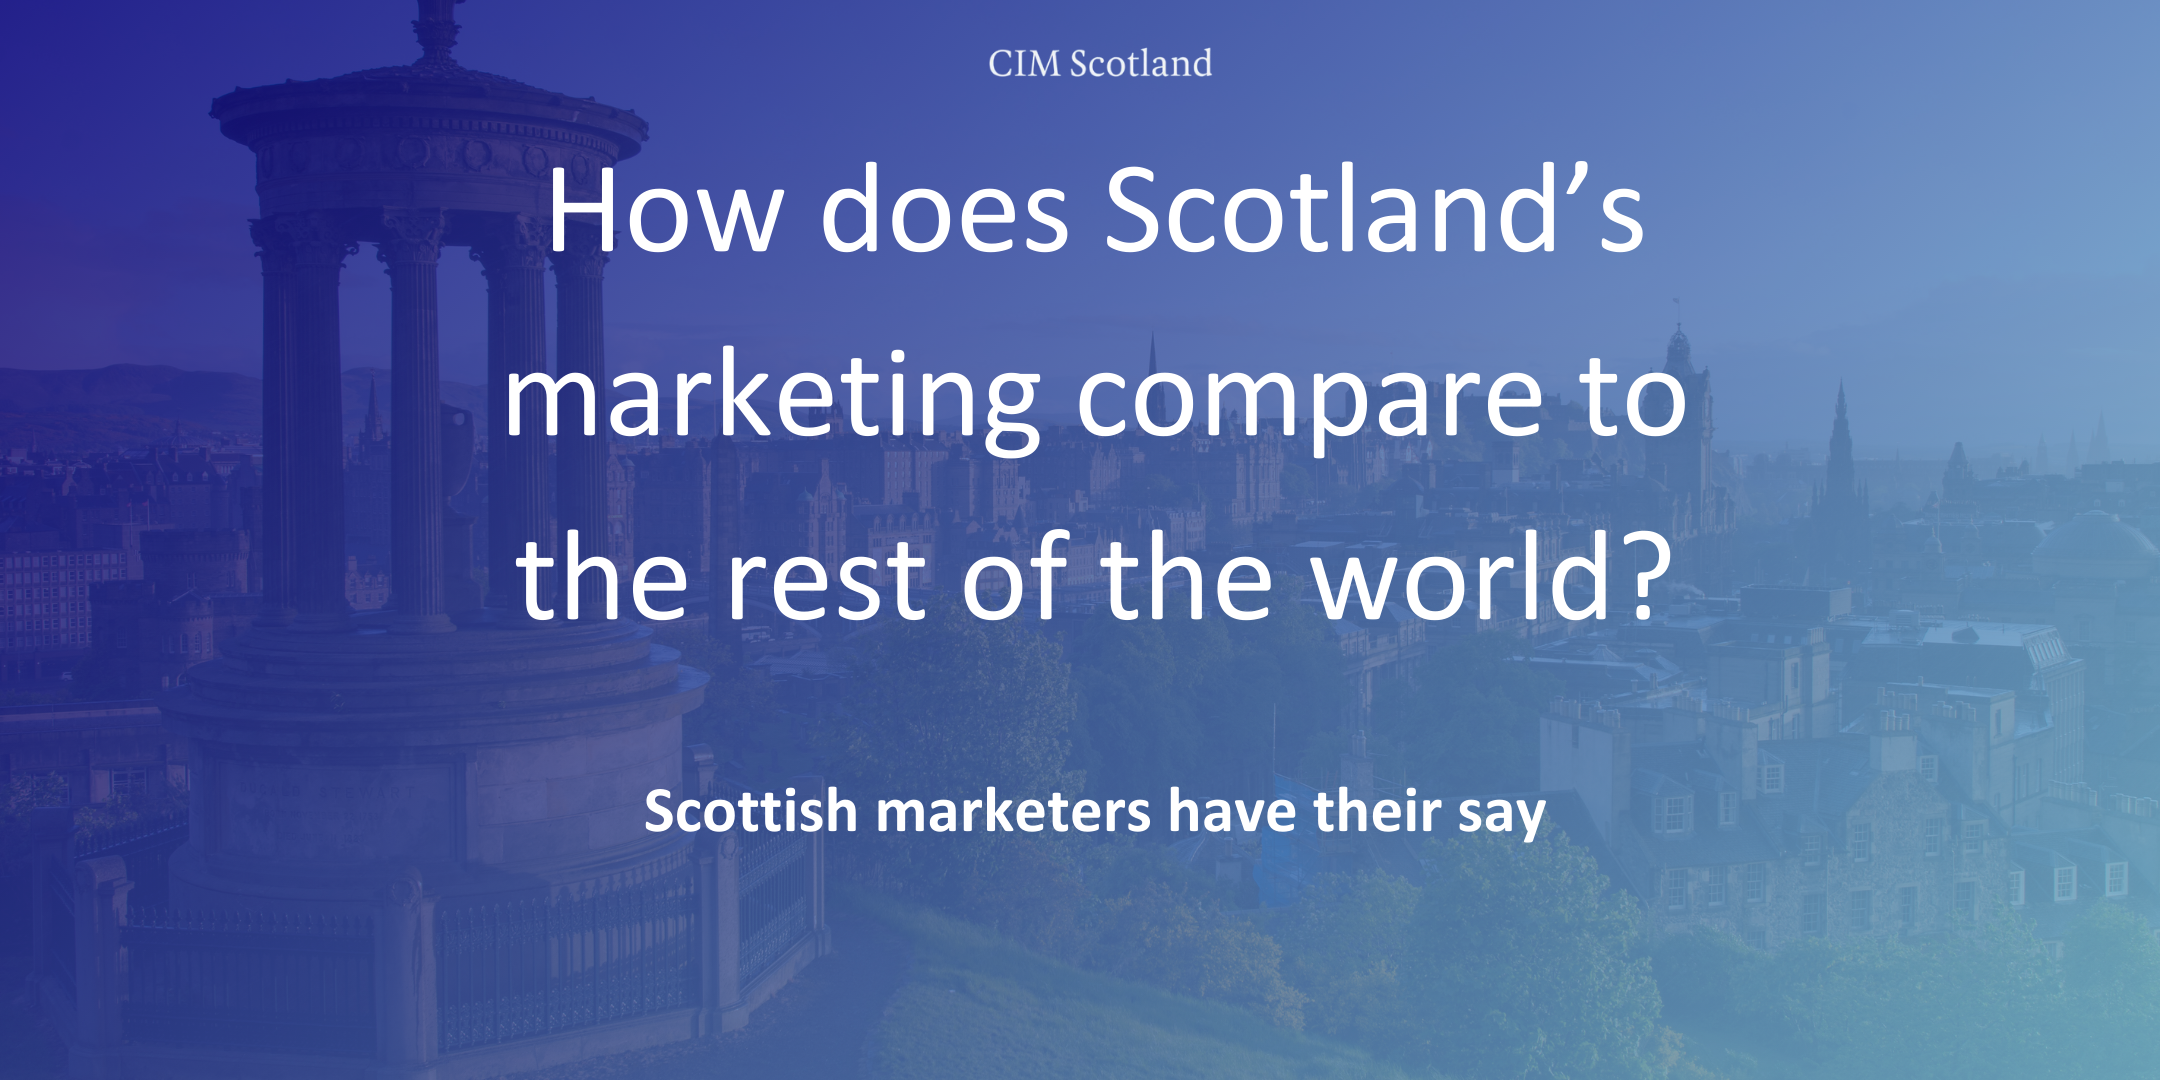 How does Scotland’s marketing compare to the rest of the world?